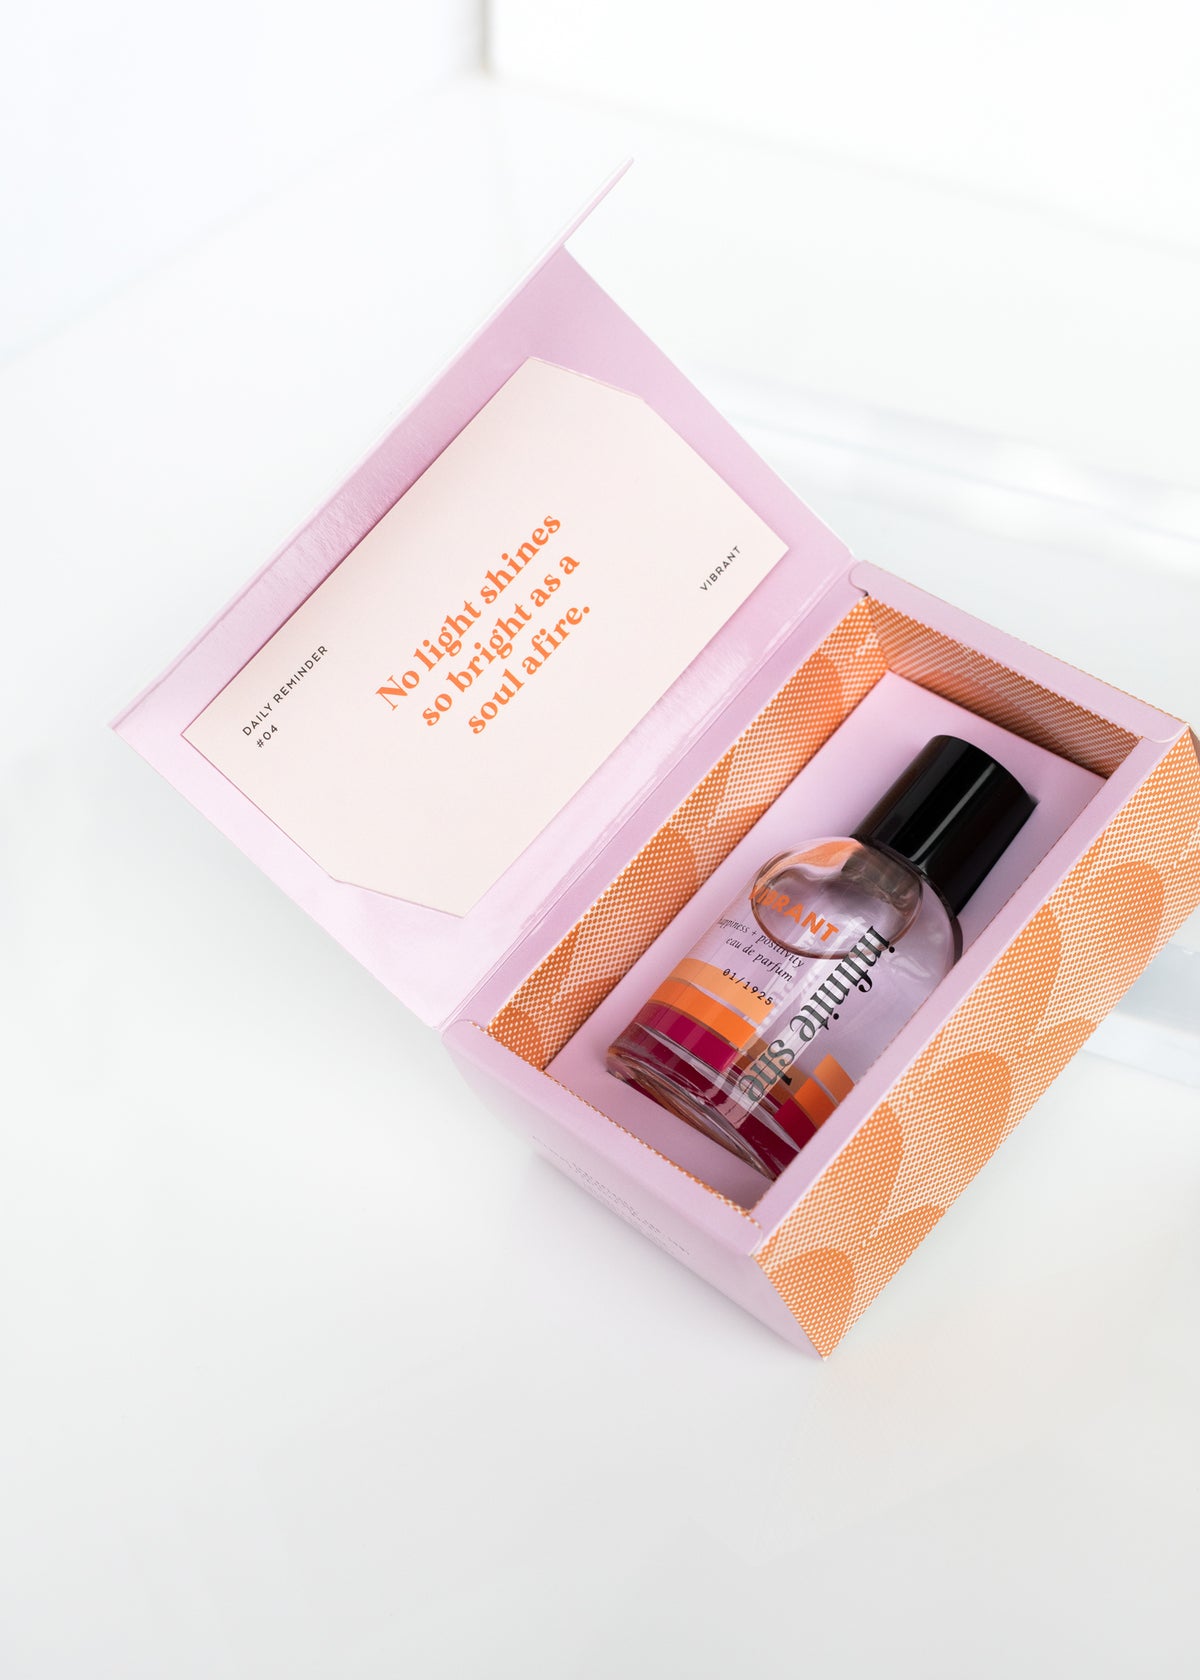 A Margot Elena beauty product box containing a bottle of Infinite She Vibrant Eau de Parfum, opened to reveal a vibrant pink interior with a Fresh Inspiration Card, resting on a white surface.